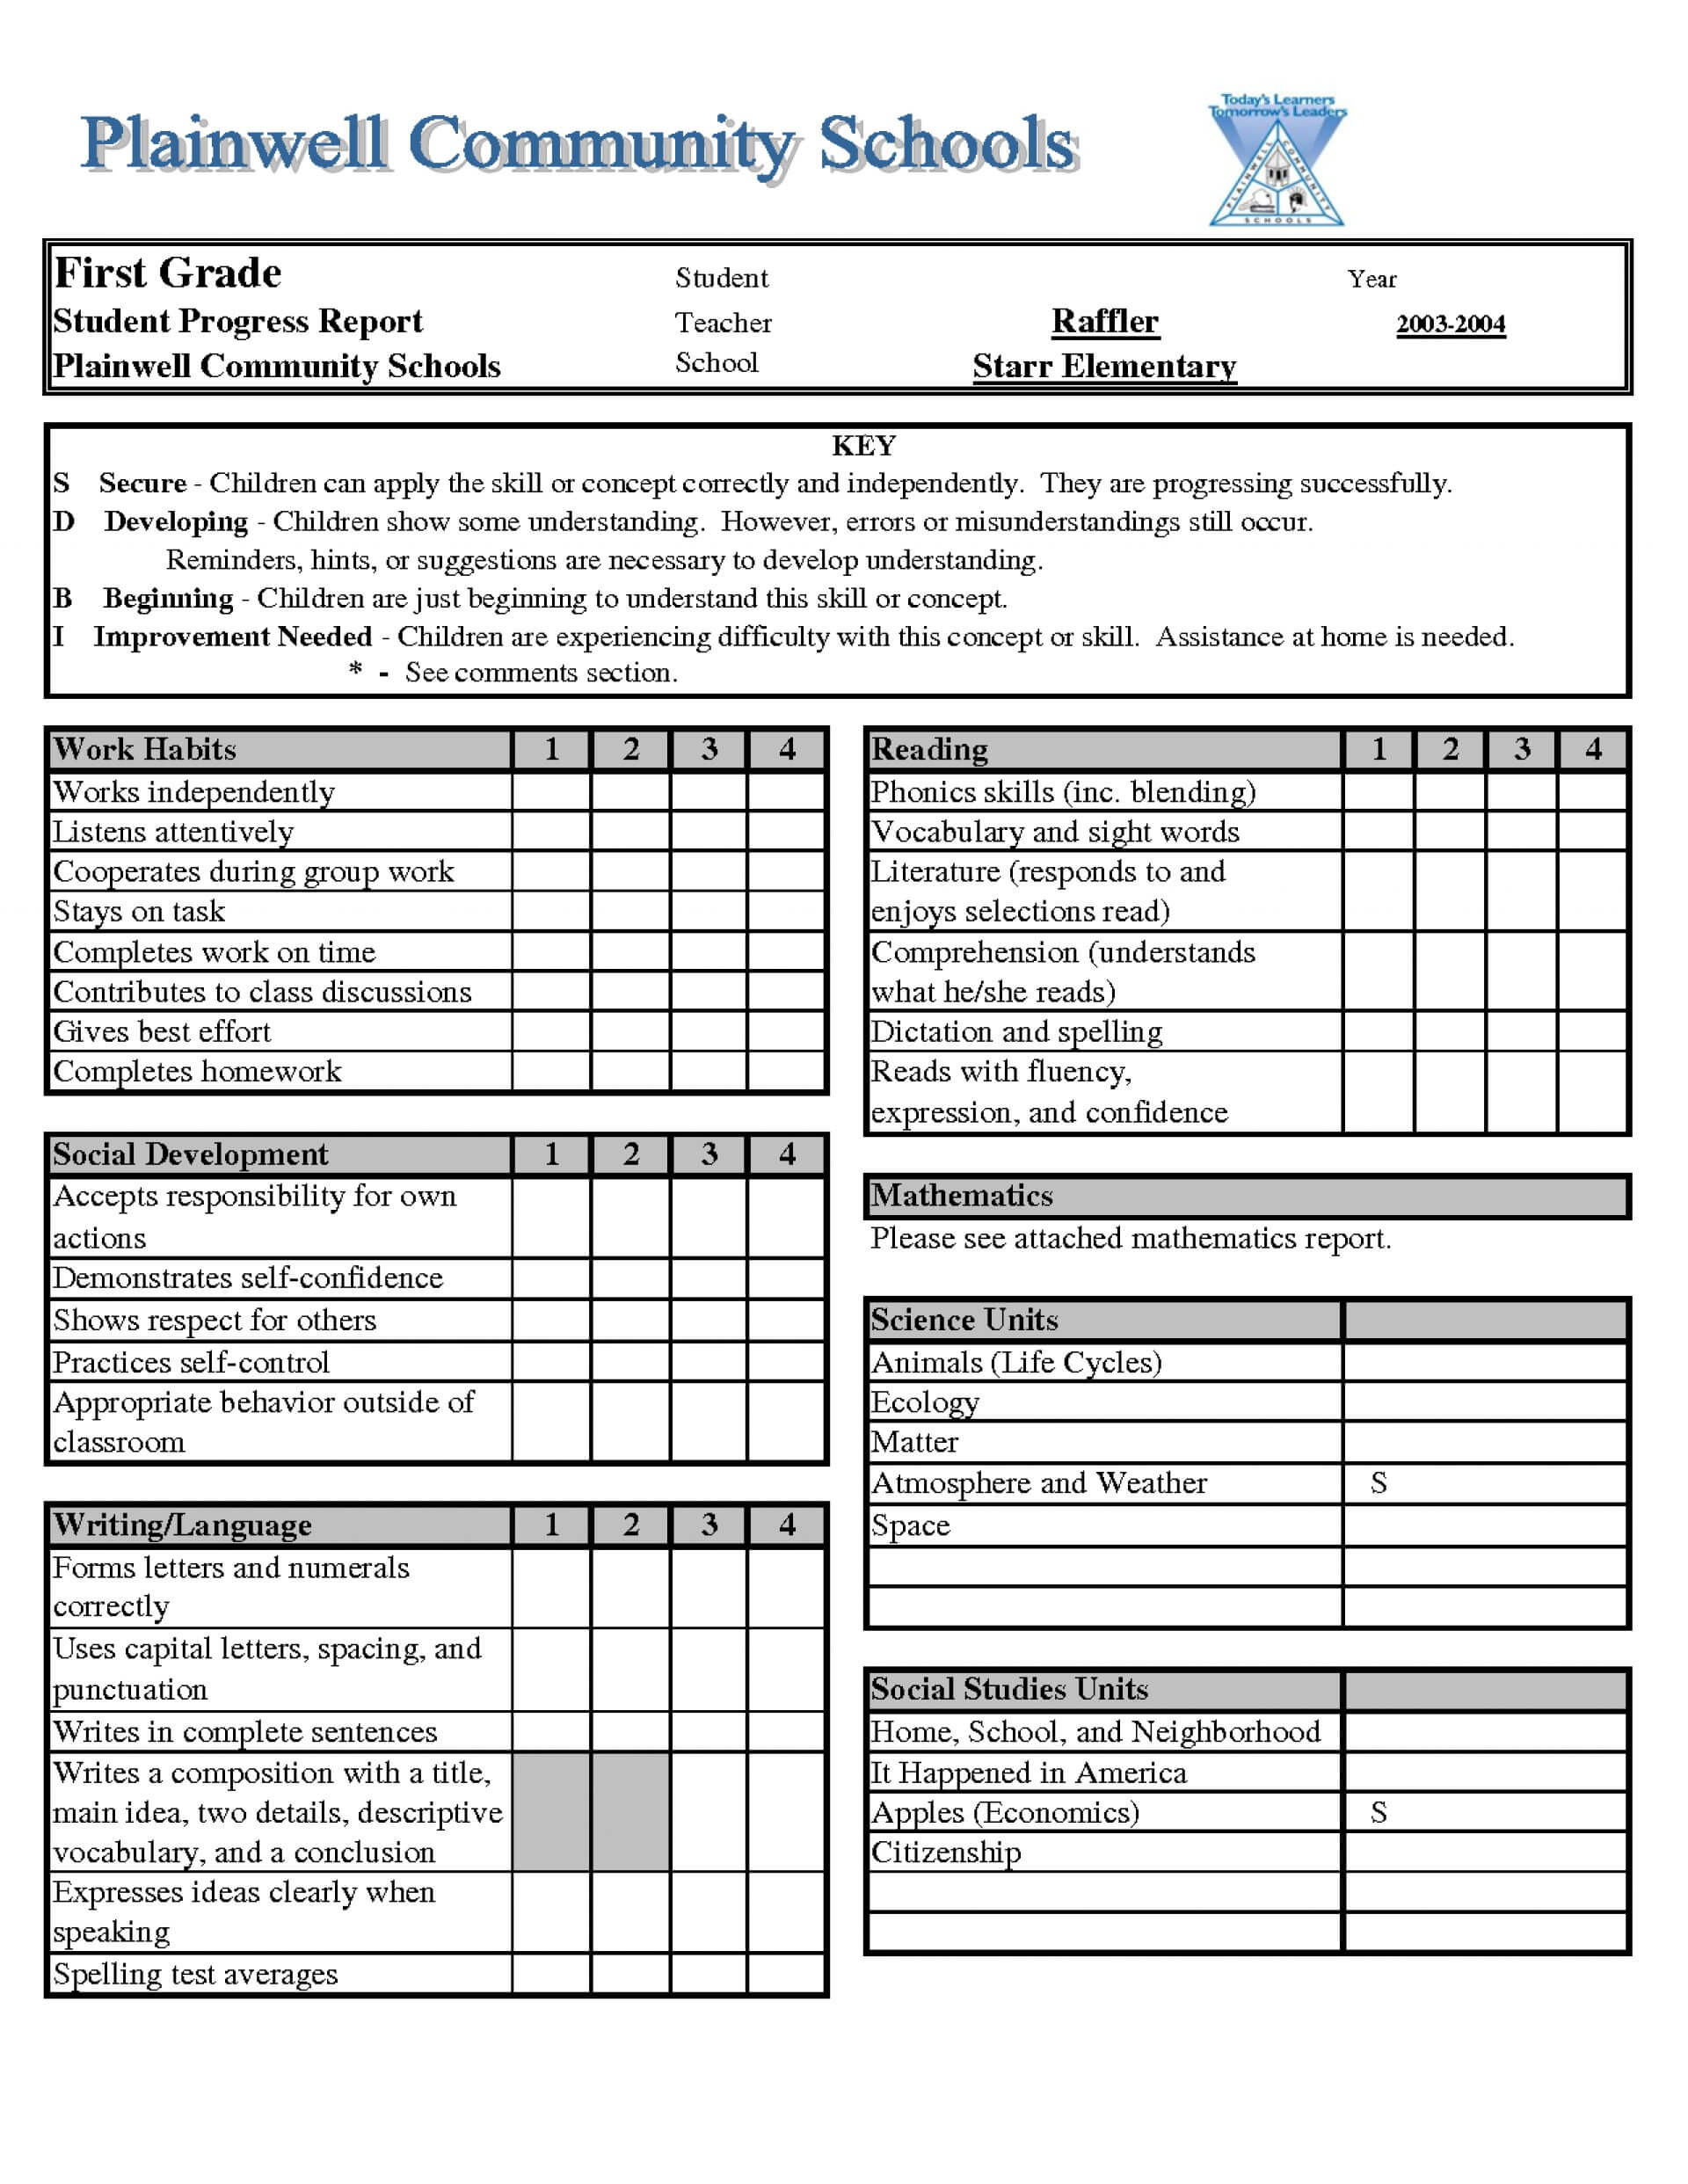 023 Free Report Card Template Image Asset Surprising Ideas Within Kindergarten Report Card Template